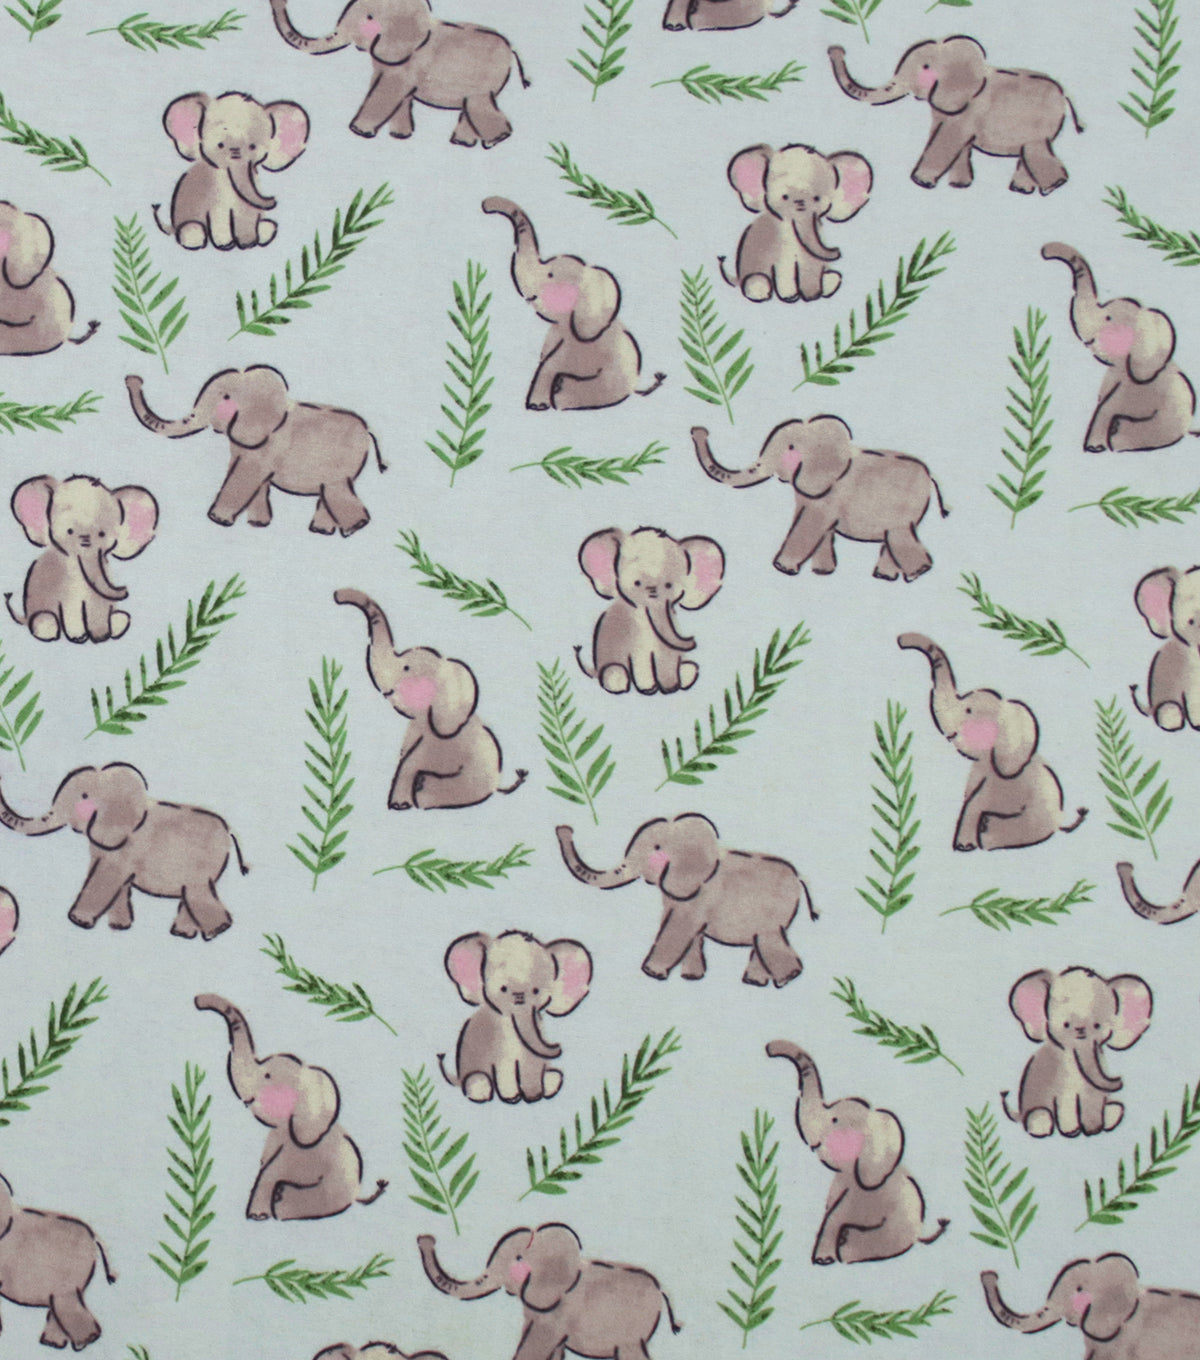 Sweet Elephants Super Snuggle Flannel Fabric by the yard